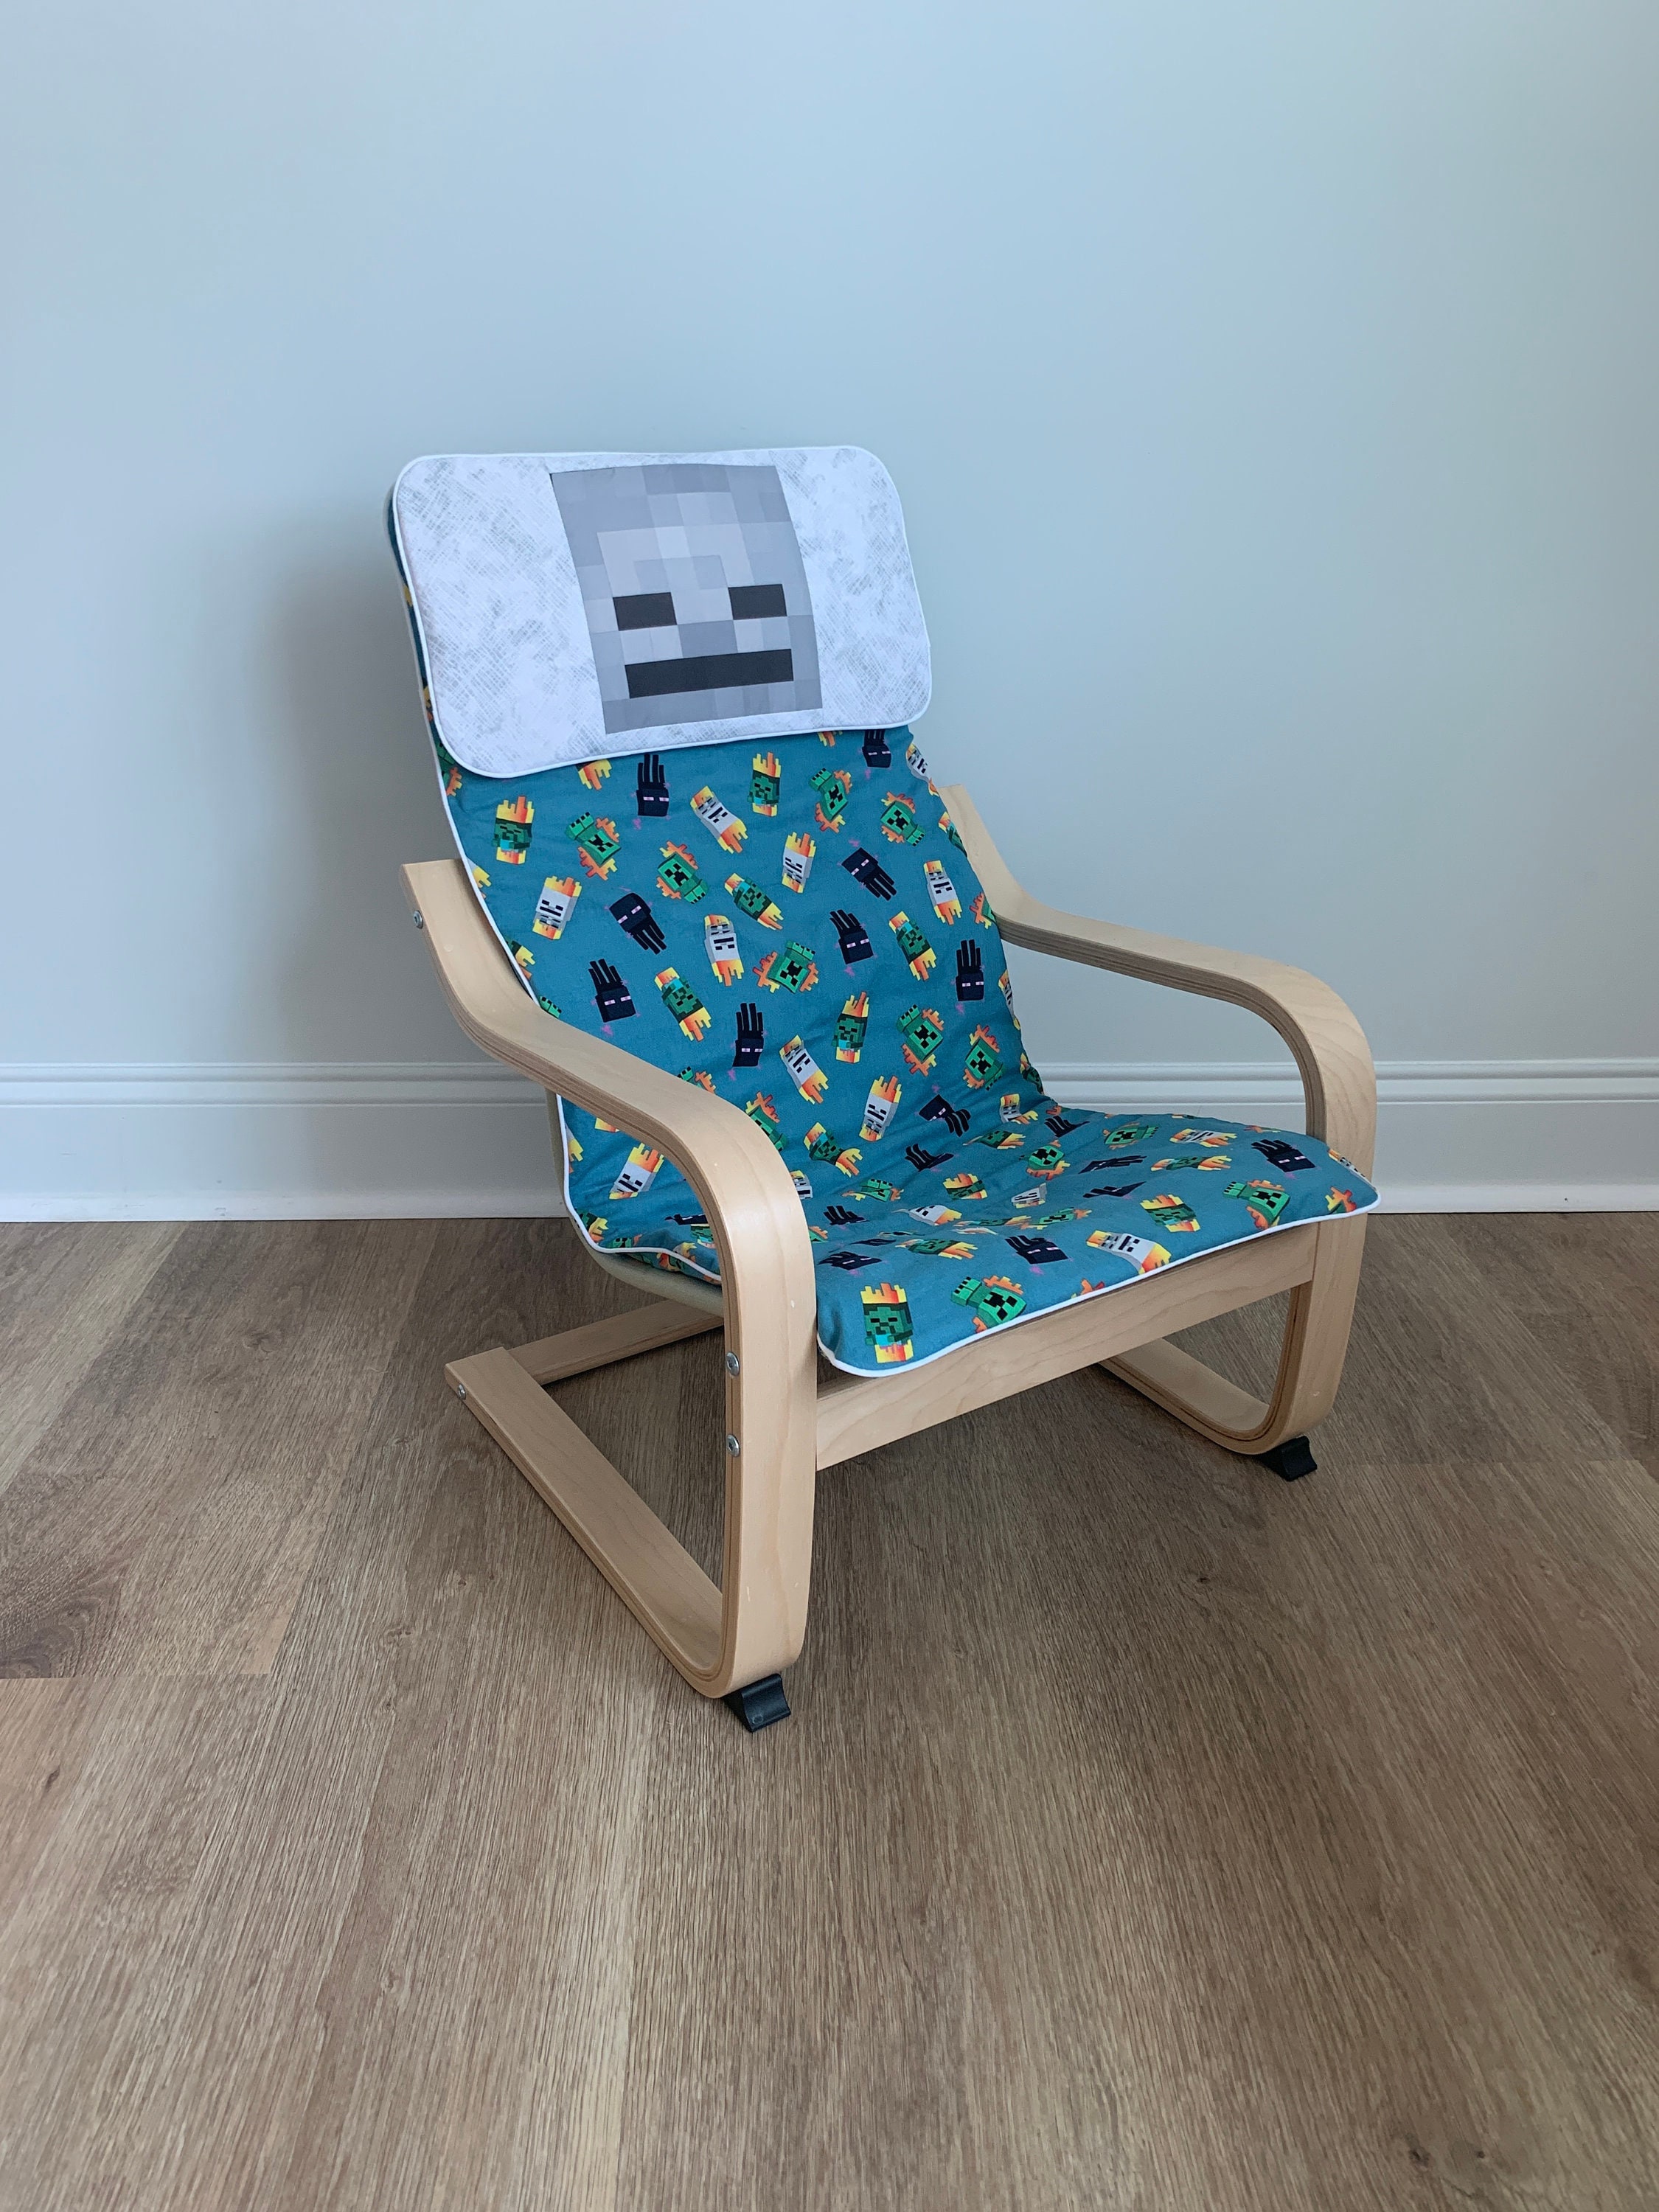 Ikea hack: Poang chair recover with paint and a custom cover